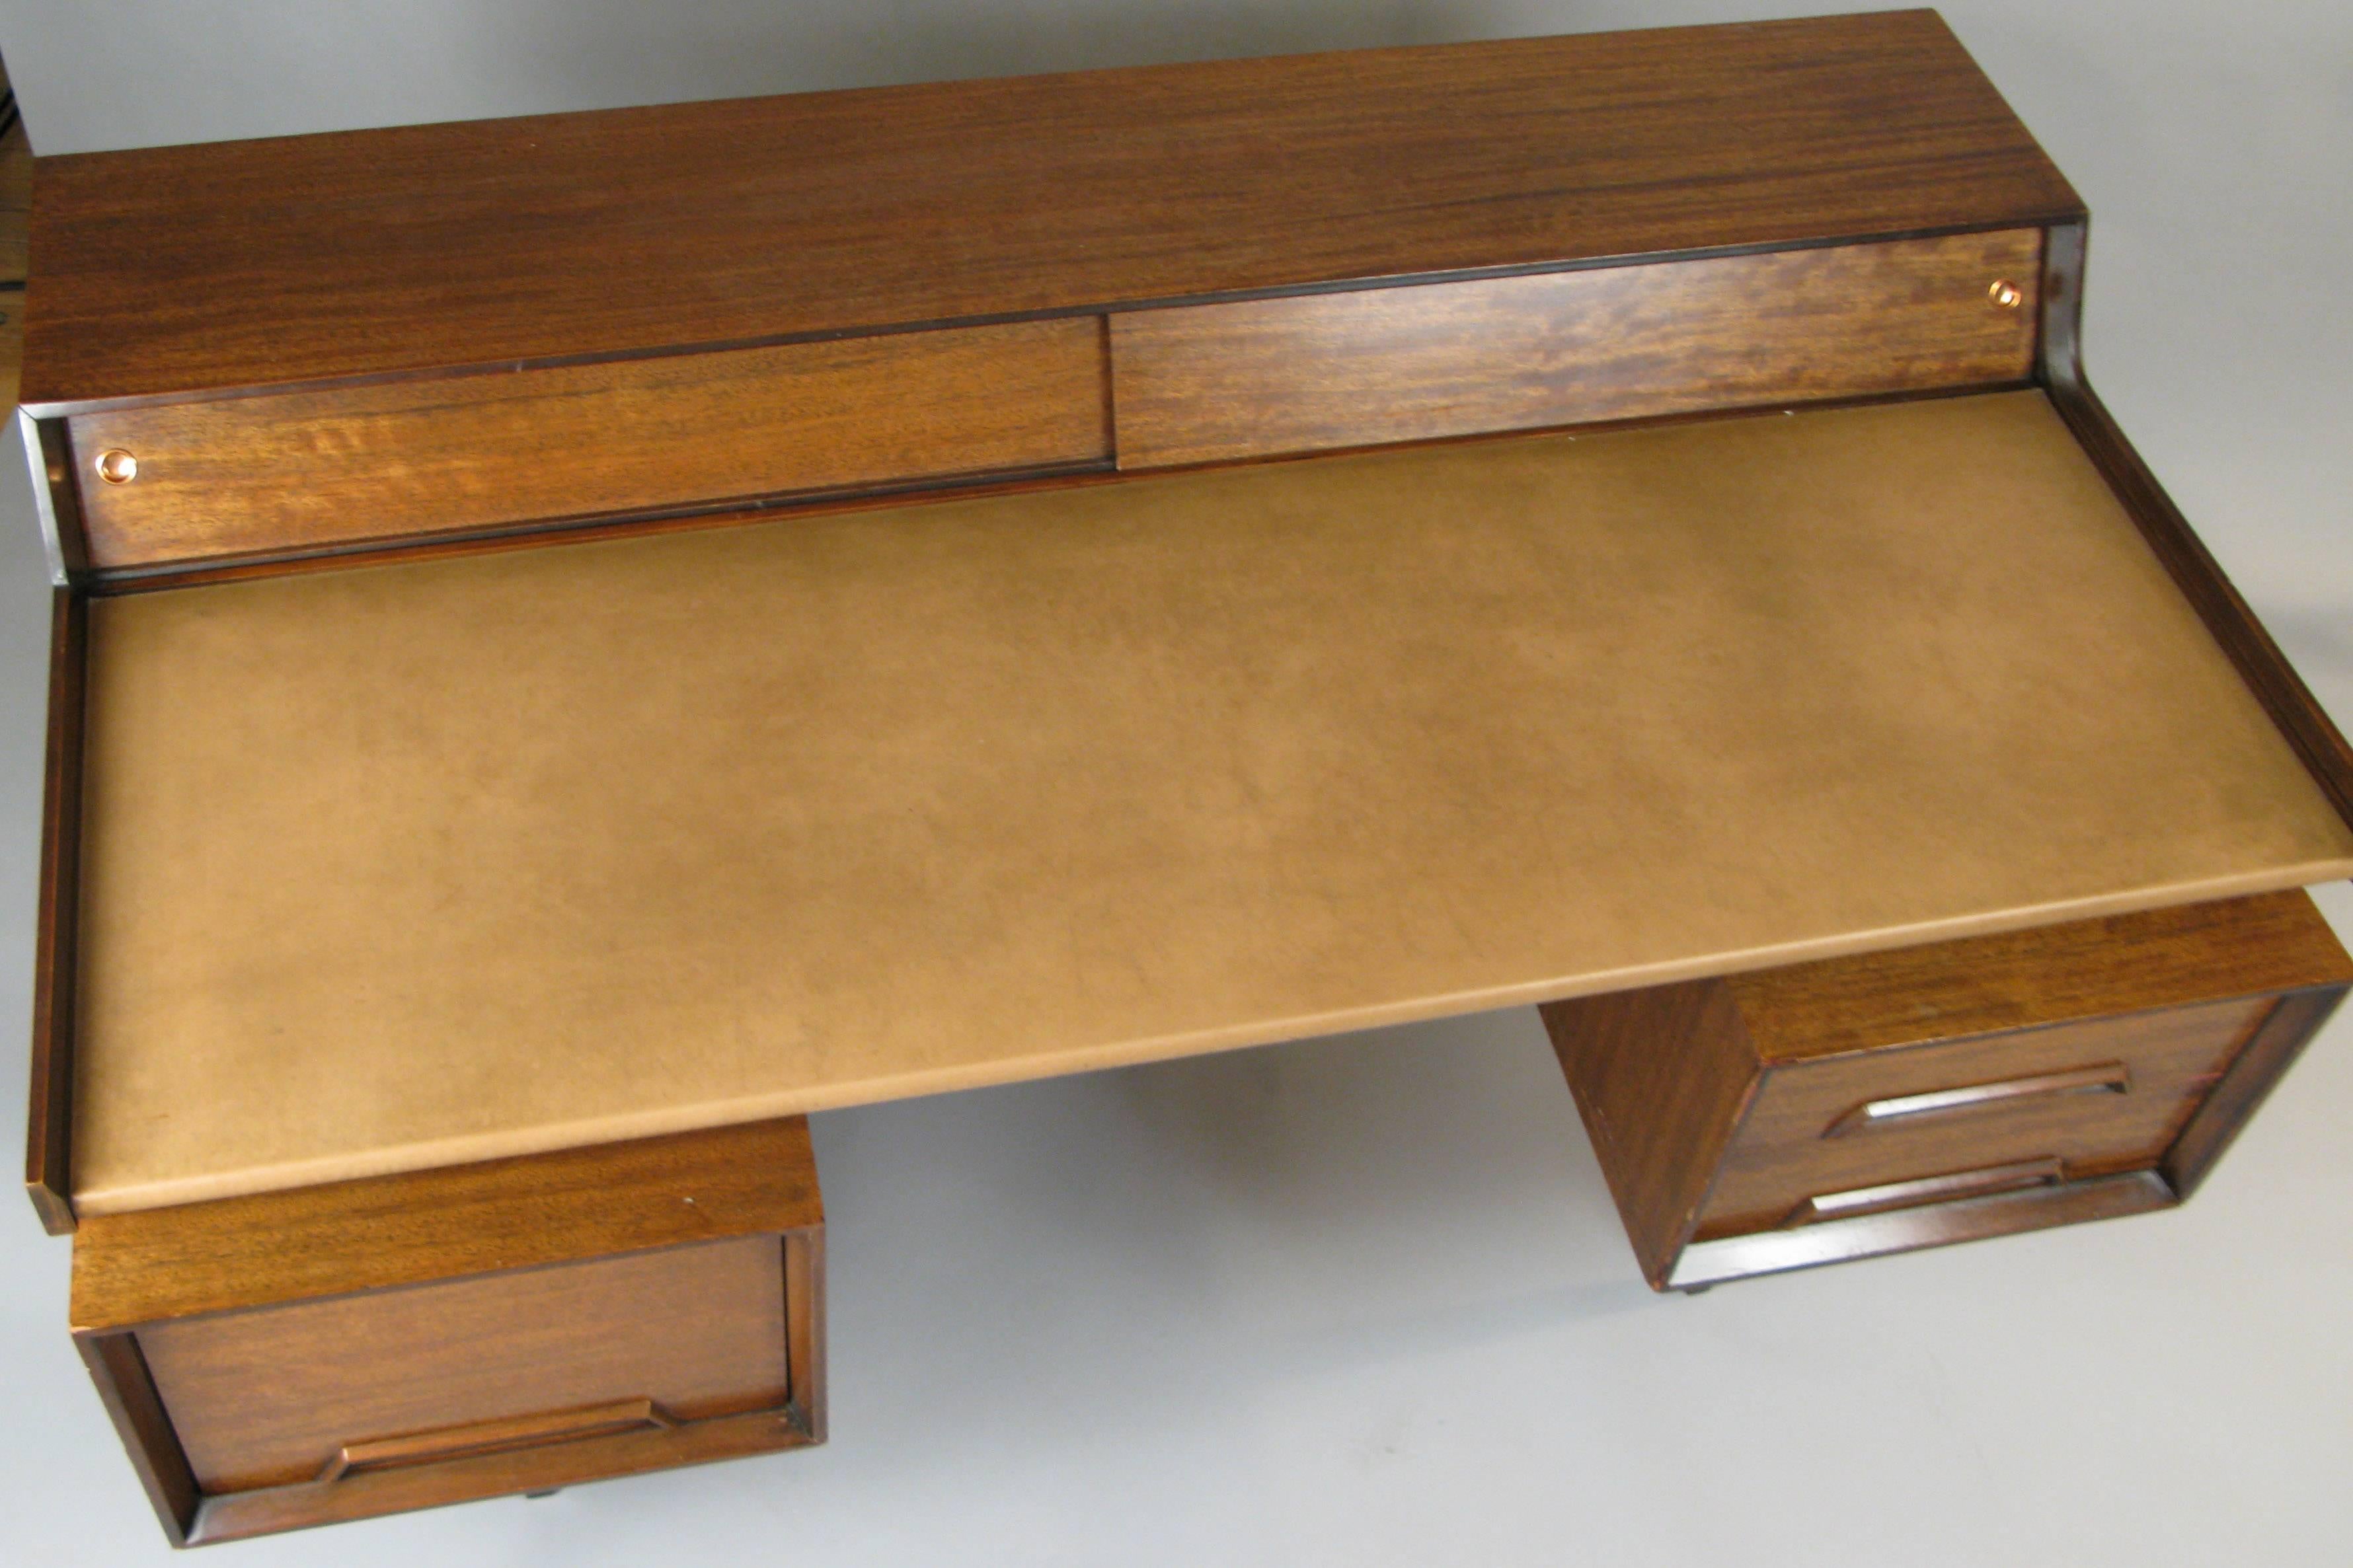 A very handsome vintage 1950s desk designed by John van Koert for Drexel. Designed with a leather writing surface floating above a pair of storage compartments, one with angled file storage. The top with a raised portion with sliding doors